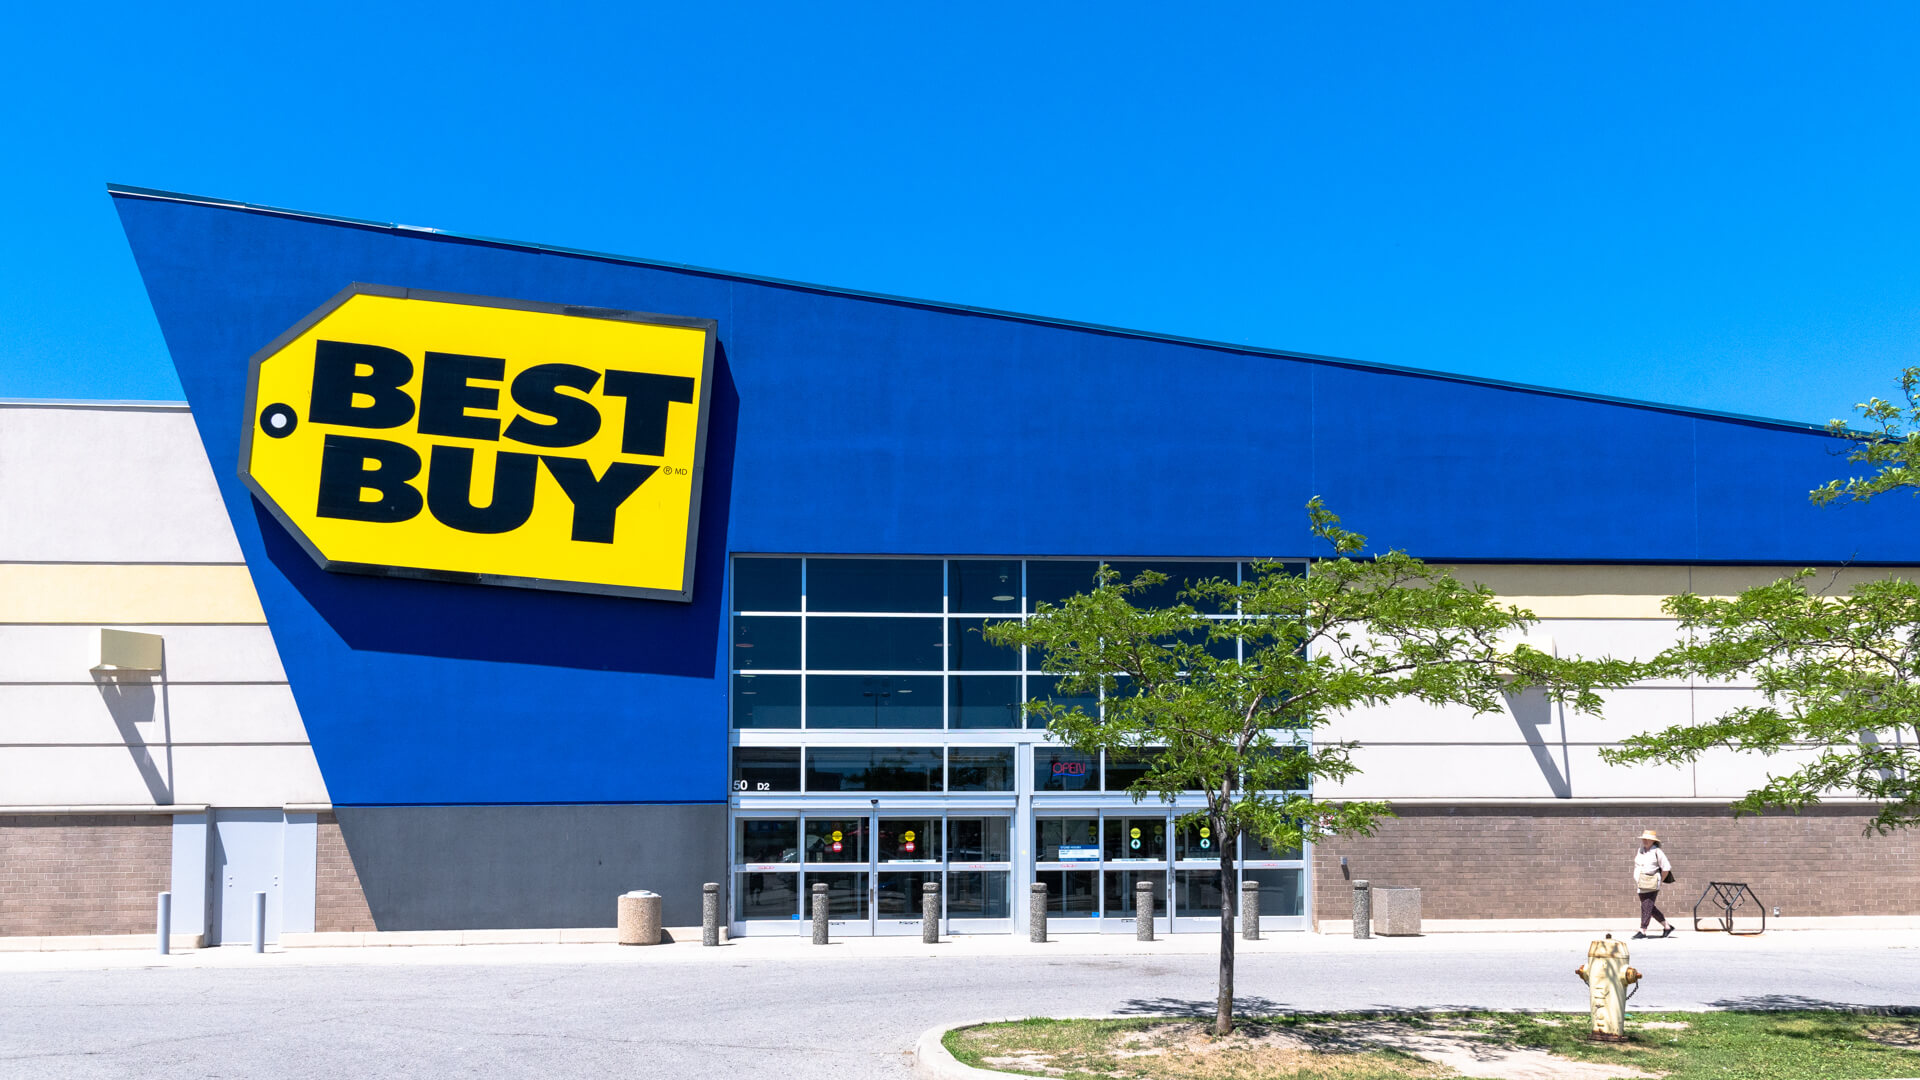 Here's One Money-Saving Tip if You're Shopping at Best Buy - CNET